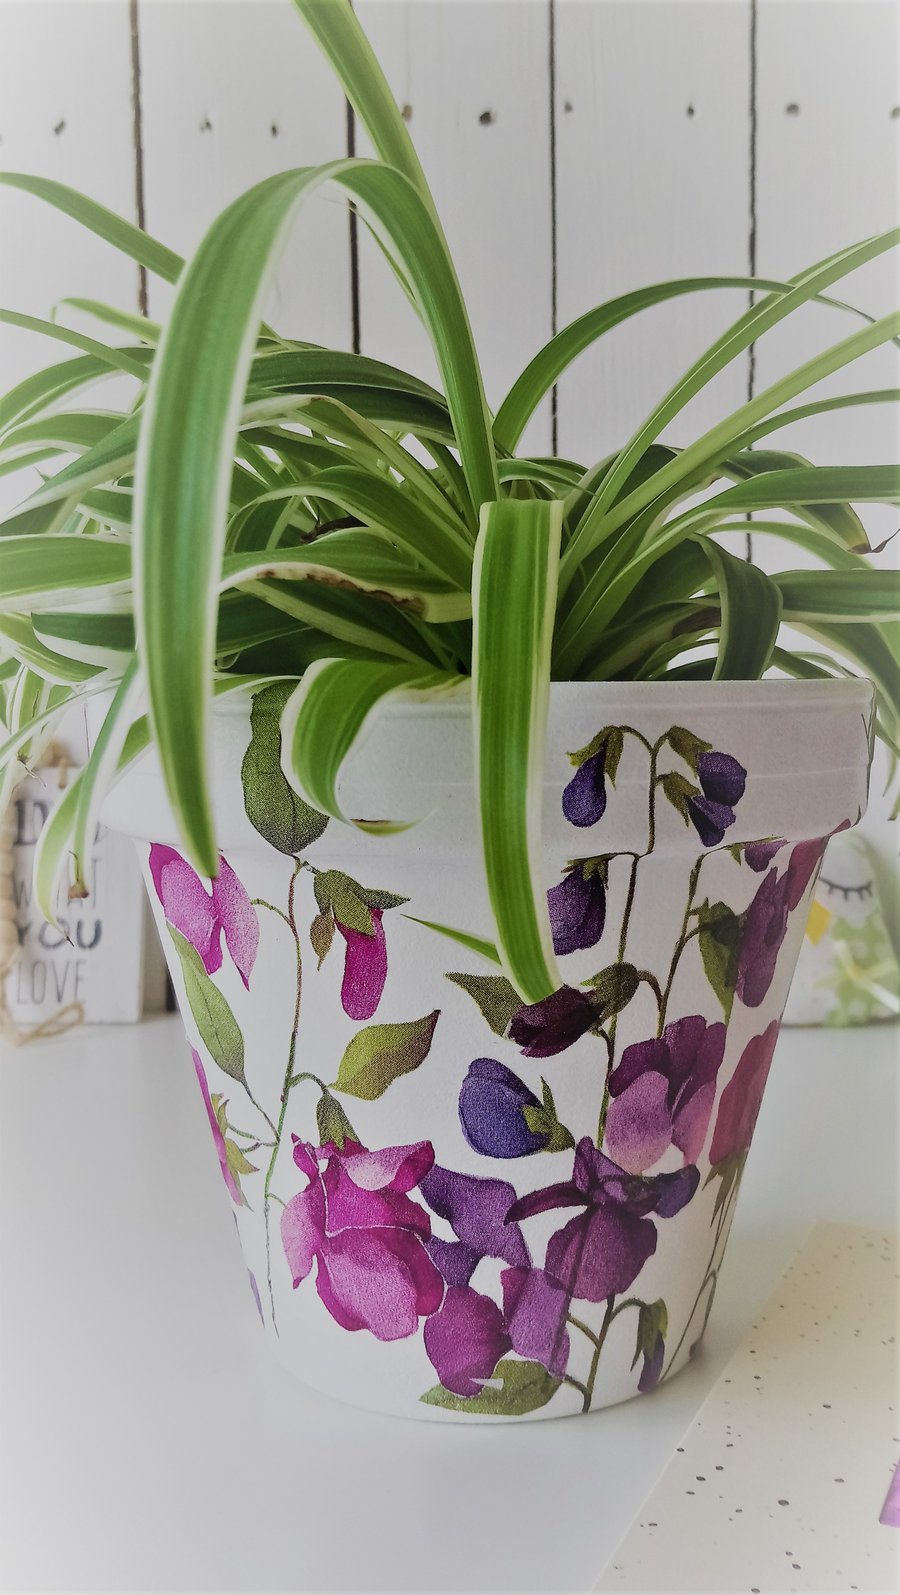 MADE TO ORDER - Decoupaged Sweet Pea Design Indoor Terracotta Pot